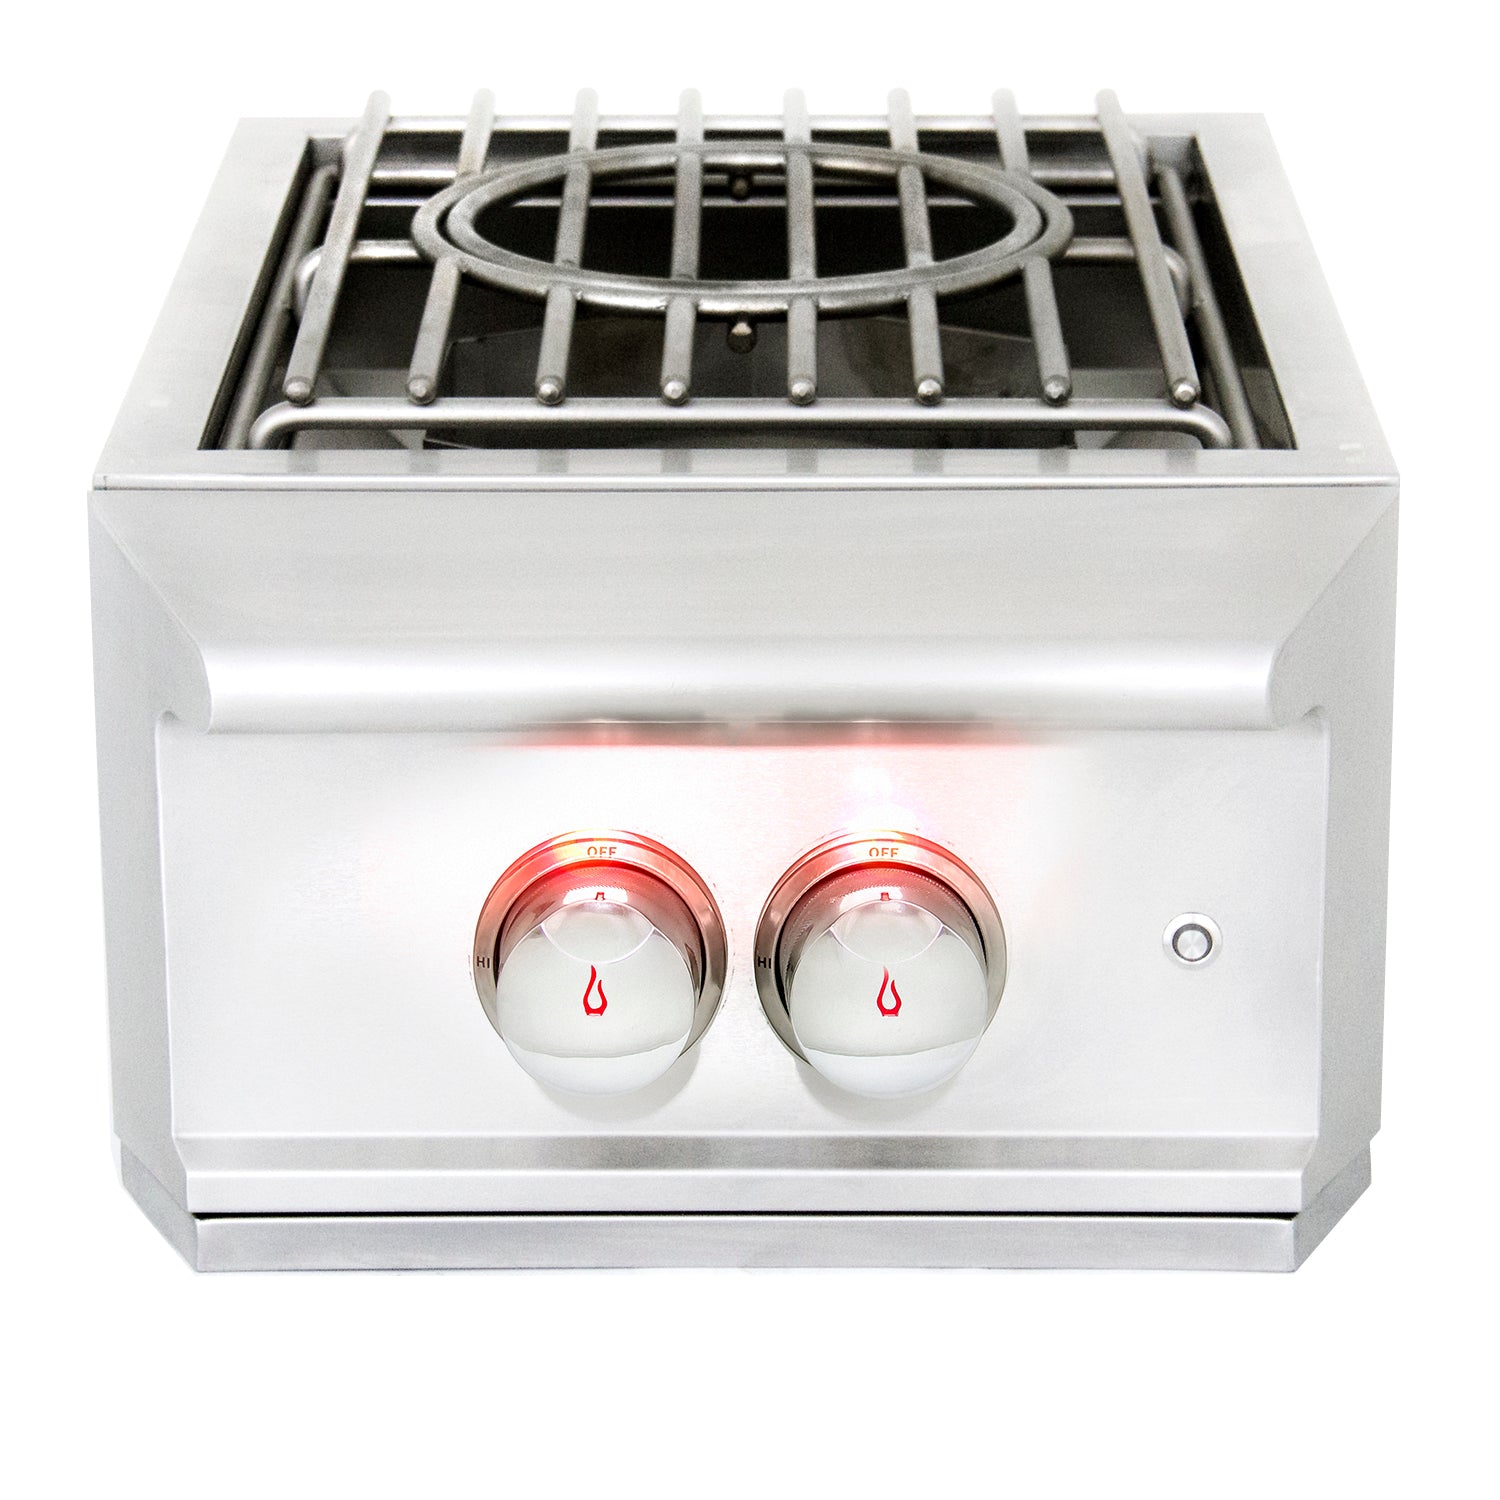 Blaze Professional LUX Built-In Gas High Performance Power Burner W/ Wok Ring & Stainless Steel Lid - BLZ-PROPB-LP/NG